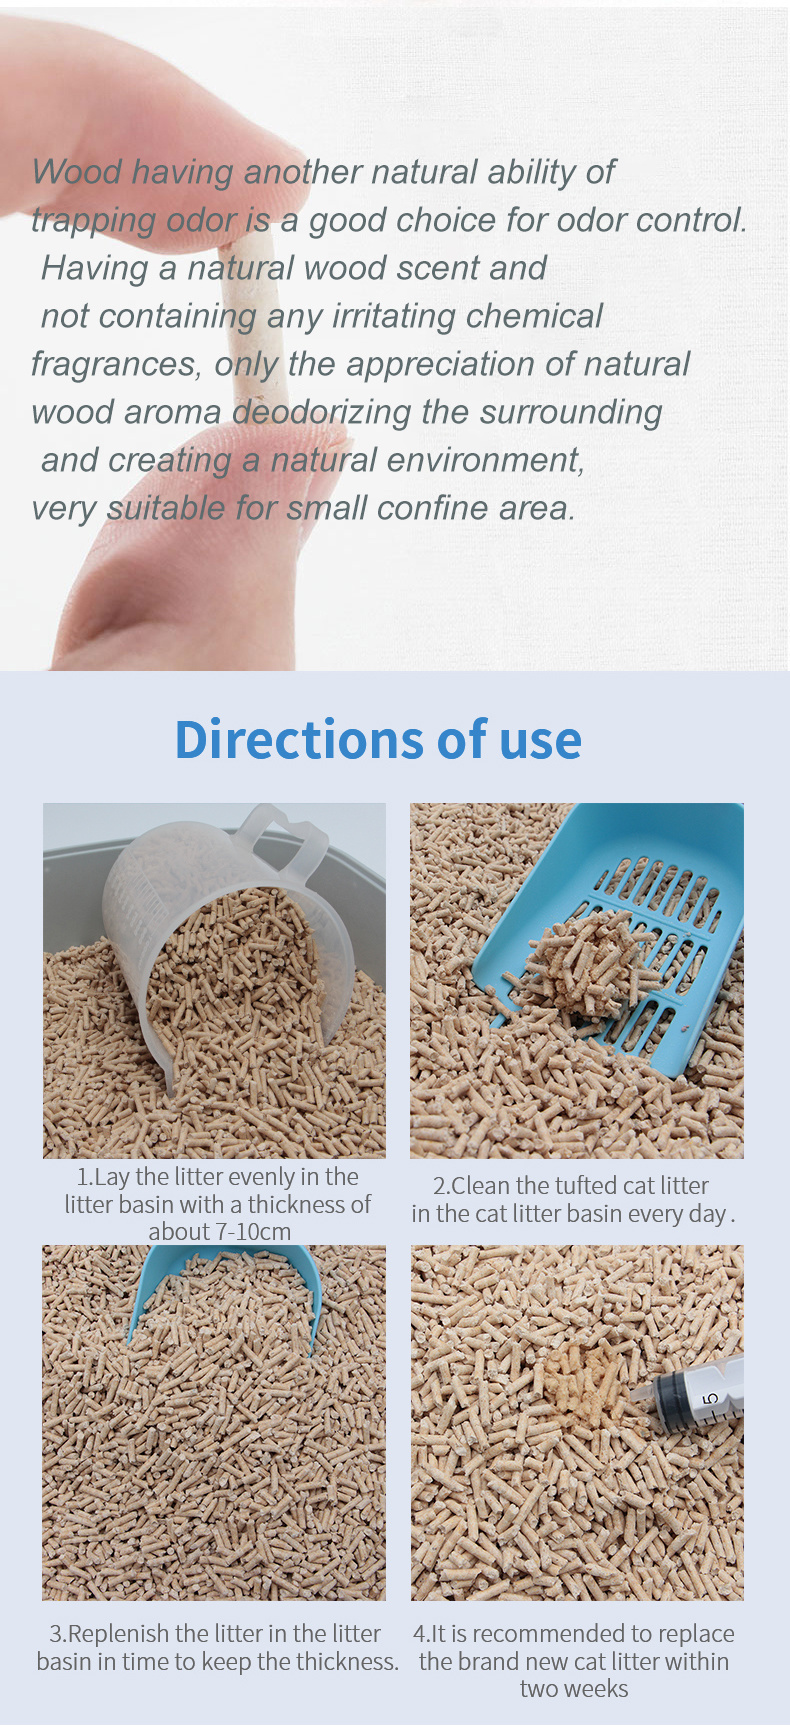 Py-Pets Latest High-Tech Clumping Wood Clumping Cat Litter Pet Products